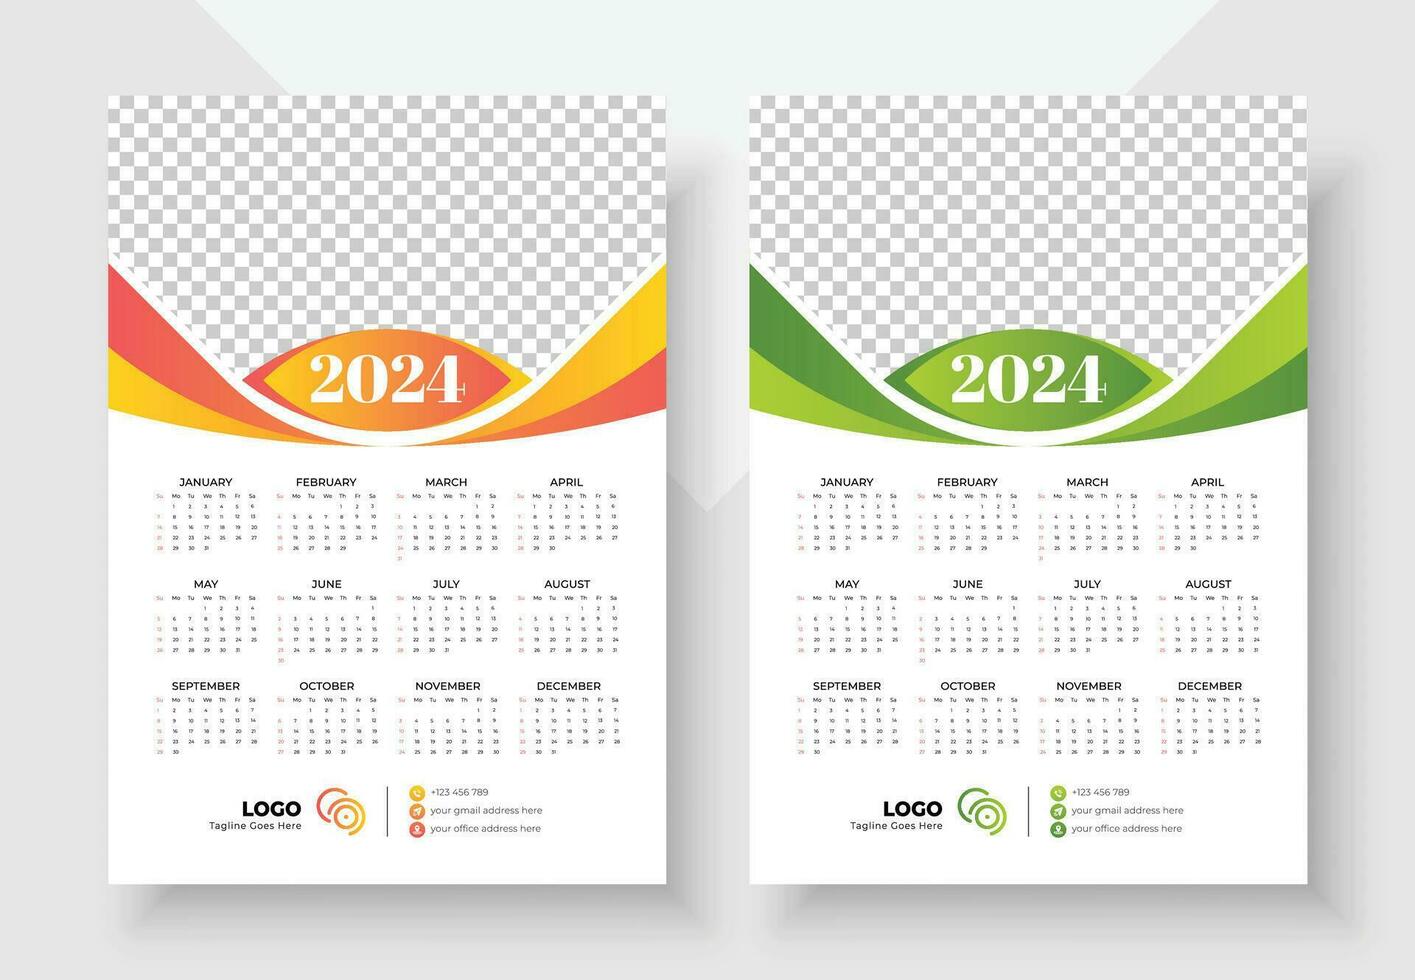 Print Ready One Page wall calendar template design for 2024, Week starts on Sunday calendar design 2024, Week starts on Sunday calendar design 2024 vector